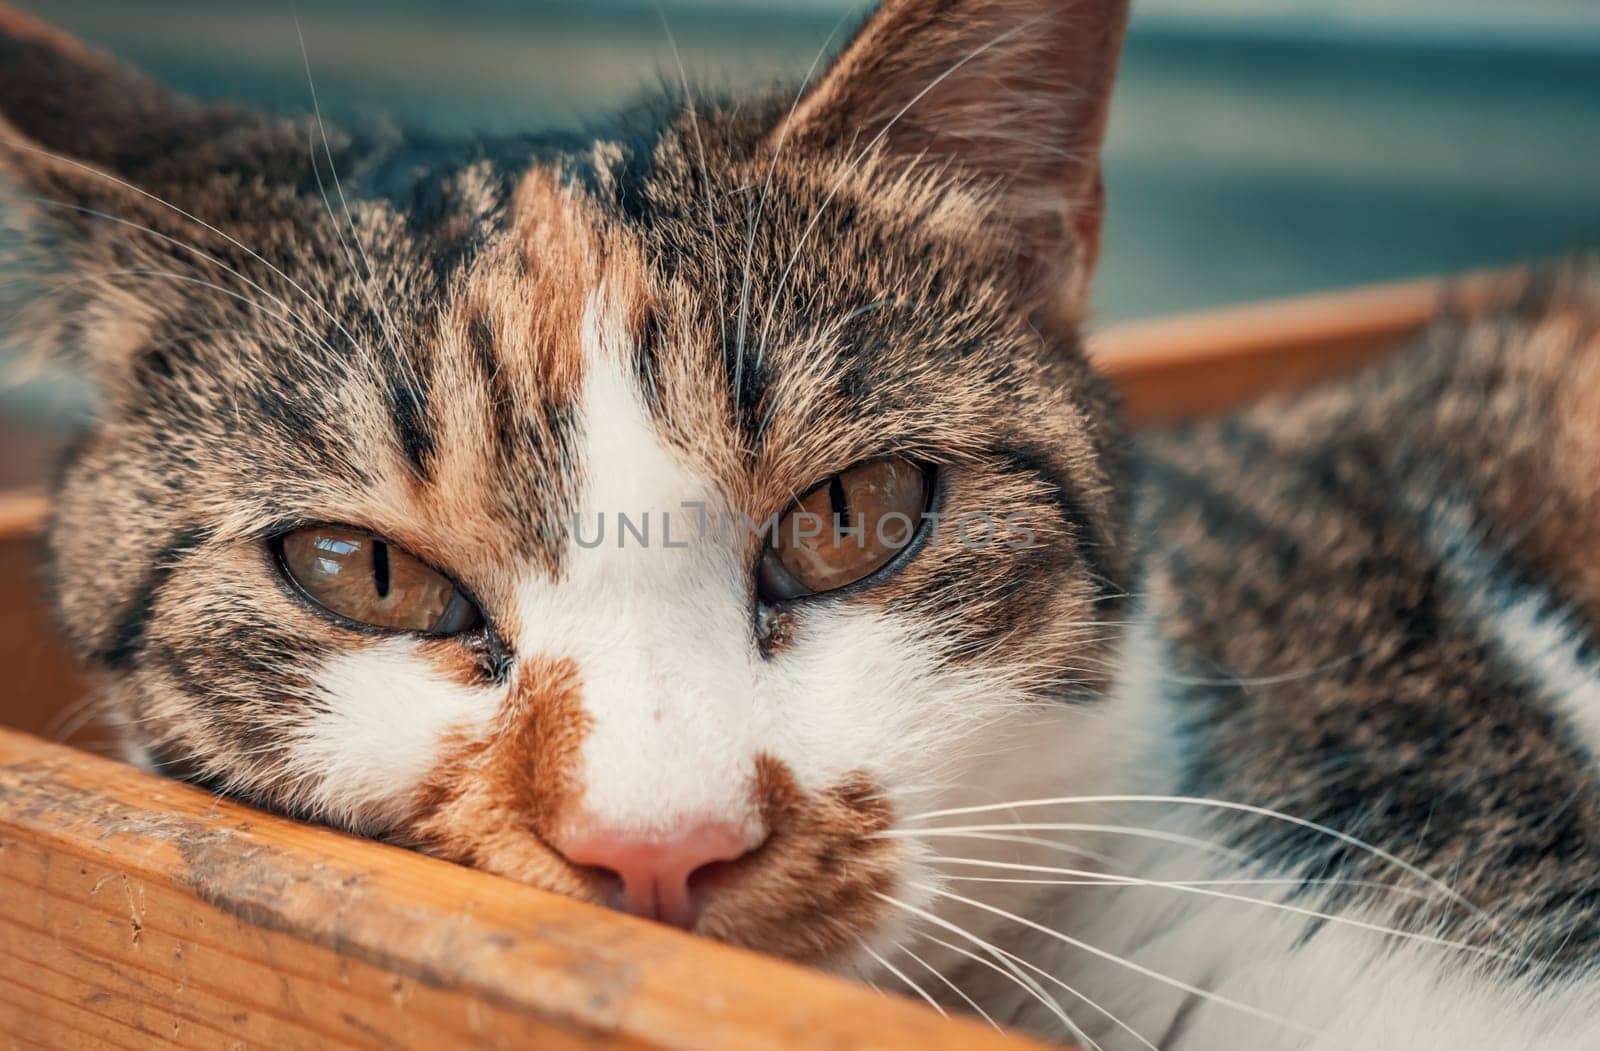 Cat pound. Close-up shot of homeless stray cat living in the animal shelter. Shelter for animals concept by Busker